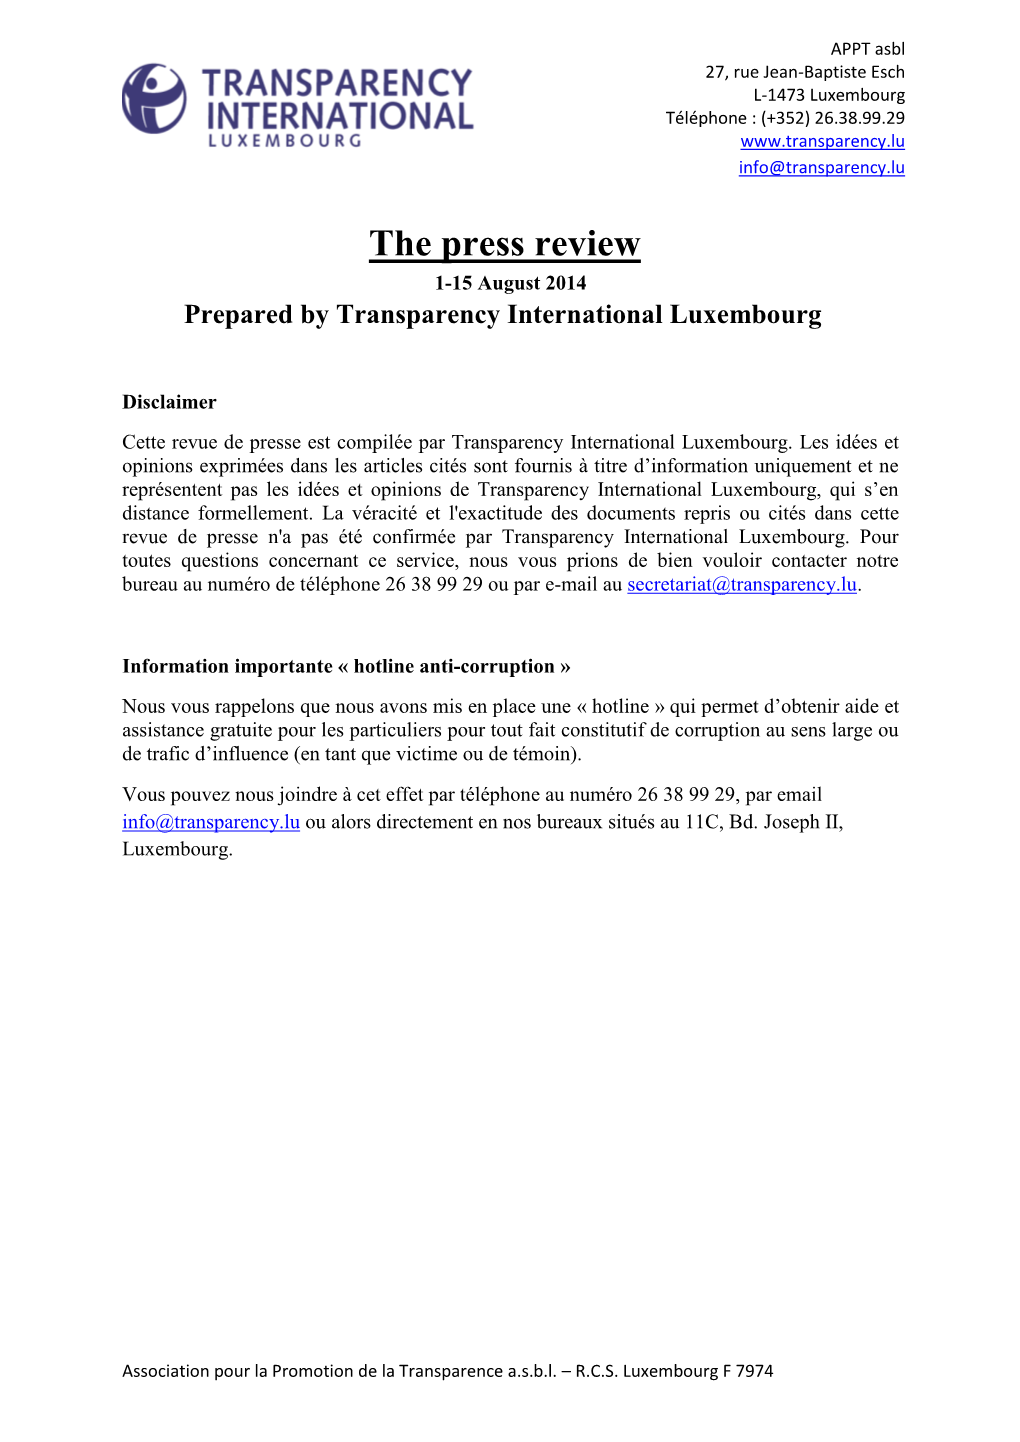 The Press Review 1-15 August 2014 Prepared by Transparency International Luxembourg